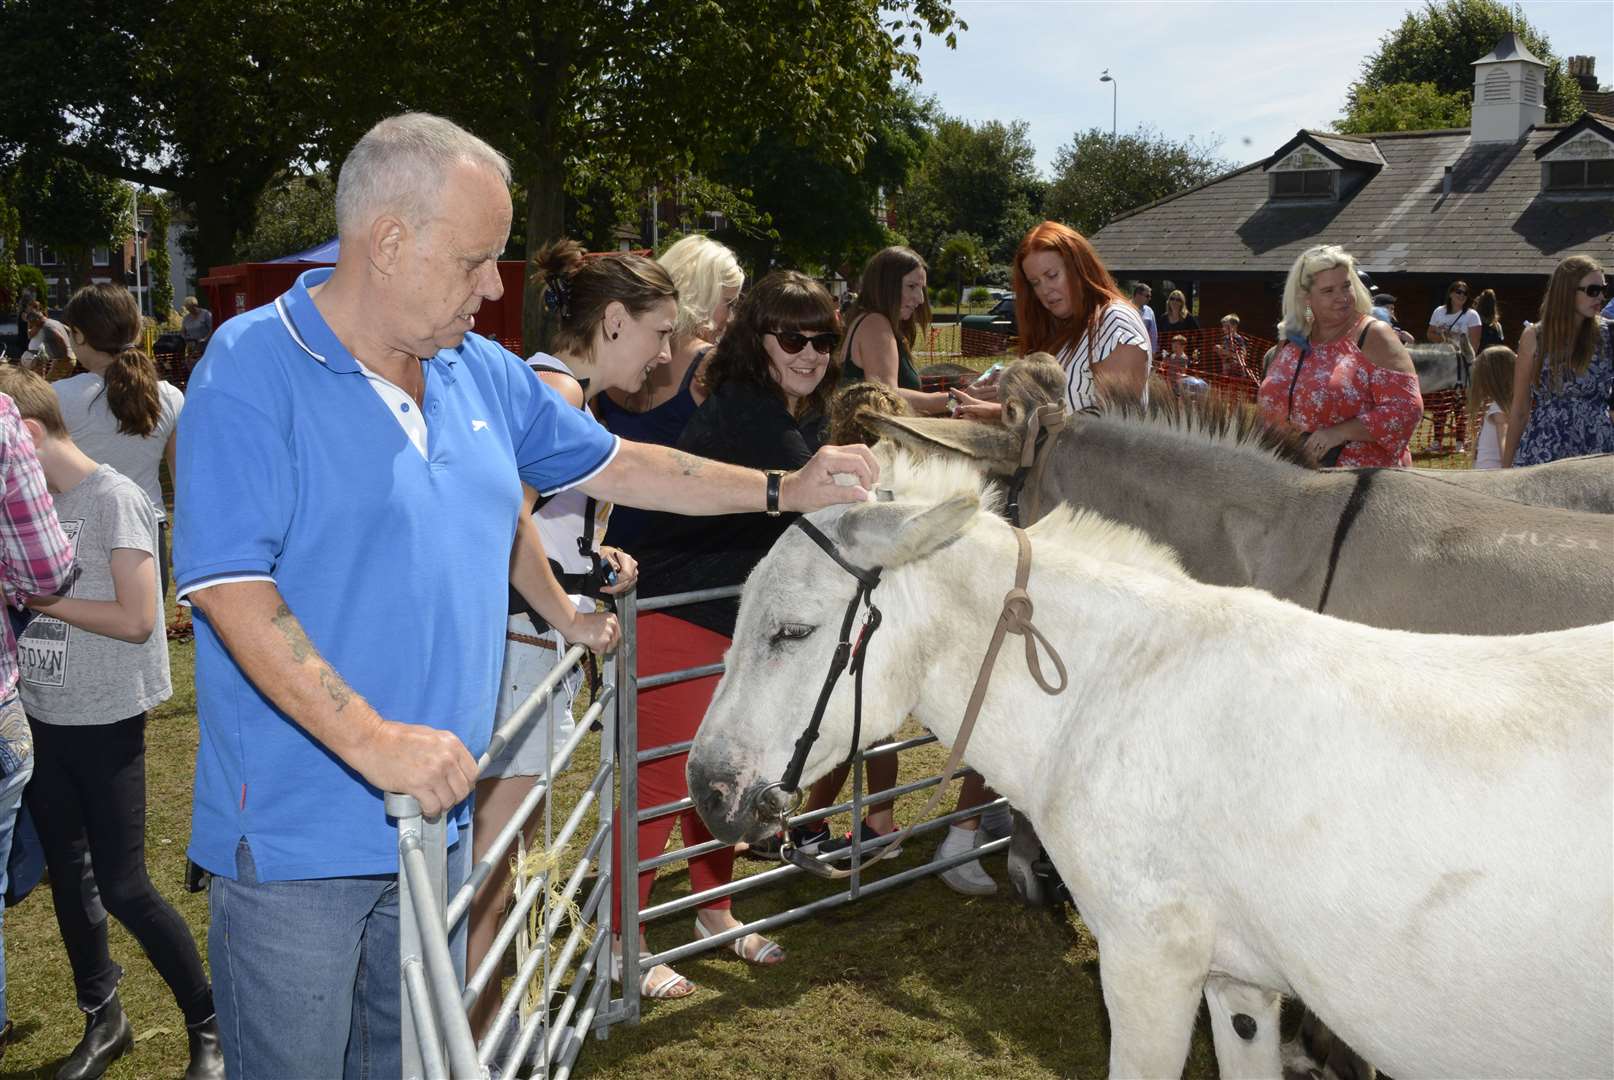 The annual donkey derby at Radnor Park in Folkestone attracts big crowds. Picture: Paul Amos